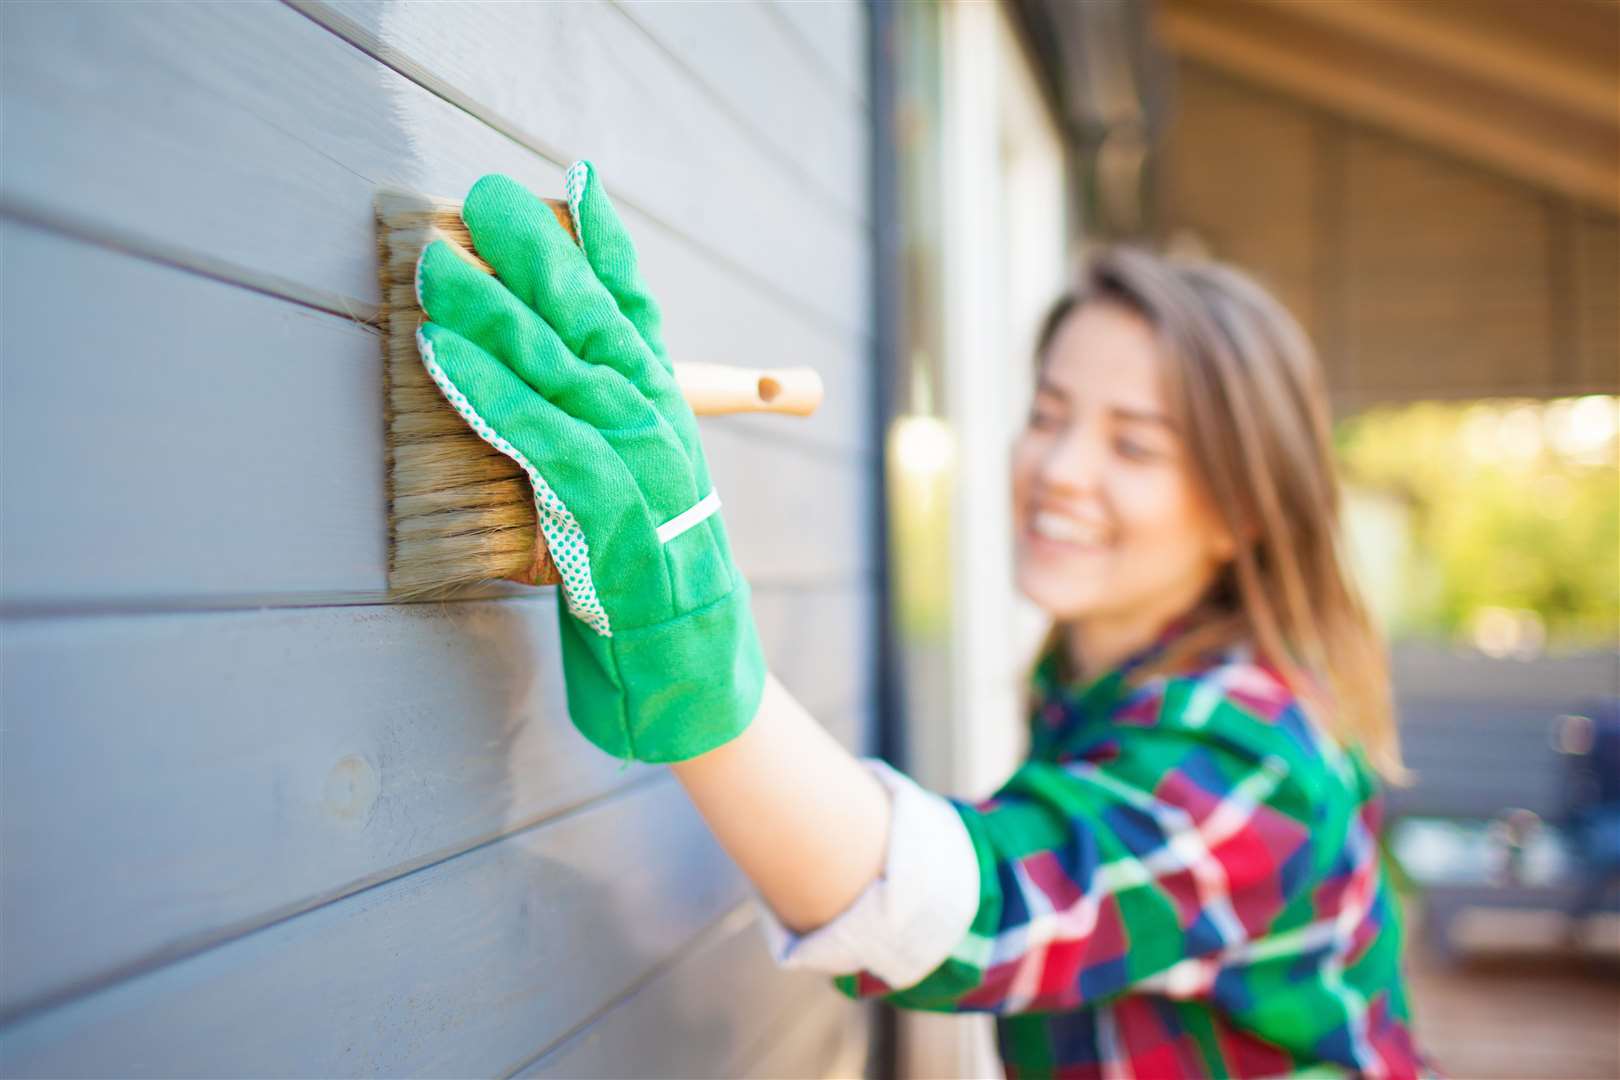 Keeping woodwork protected is just one of the tips from PCA for keeping your home in prime condition.